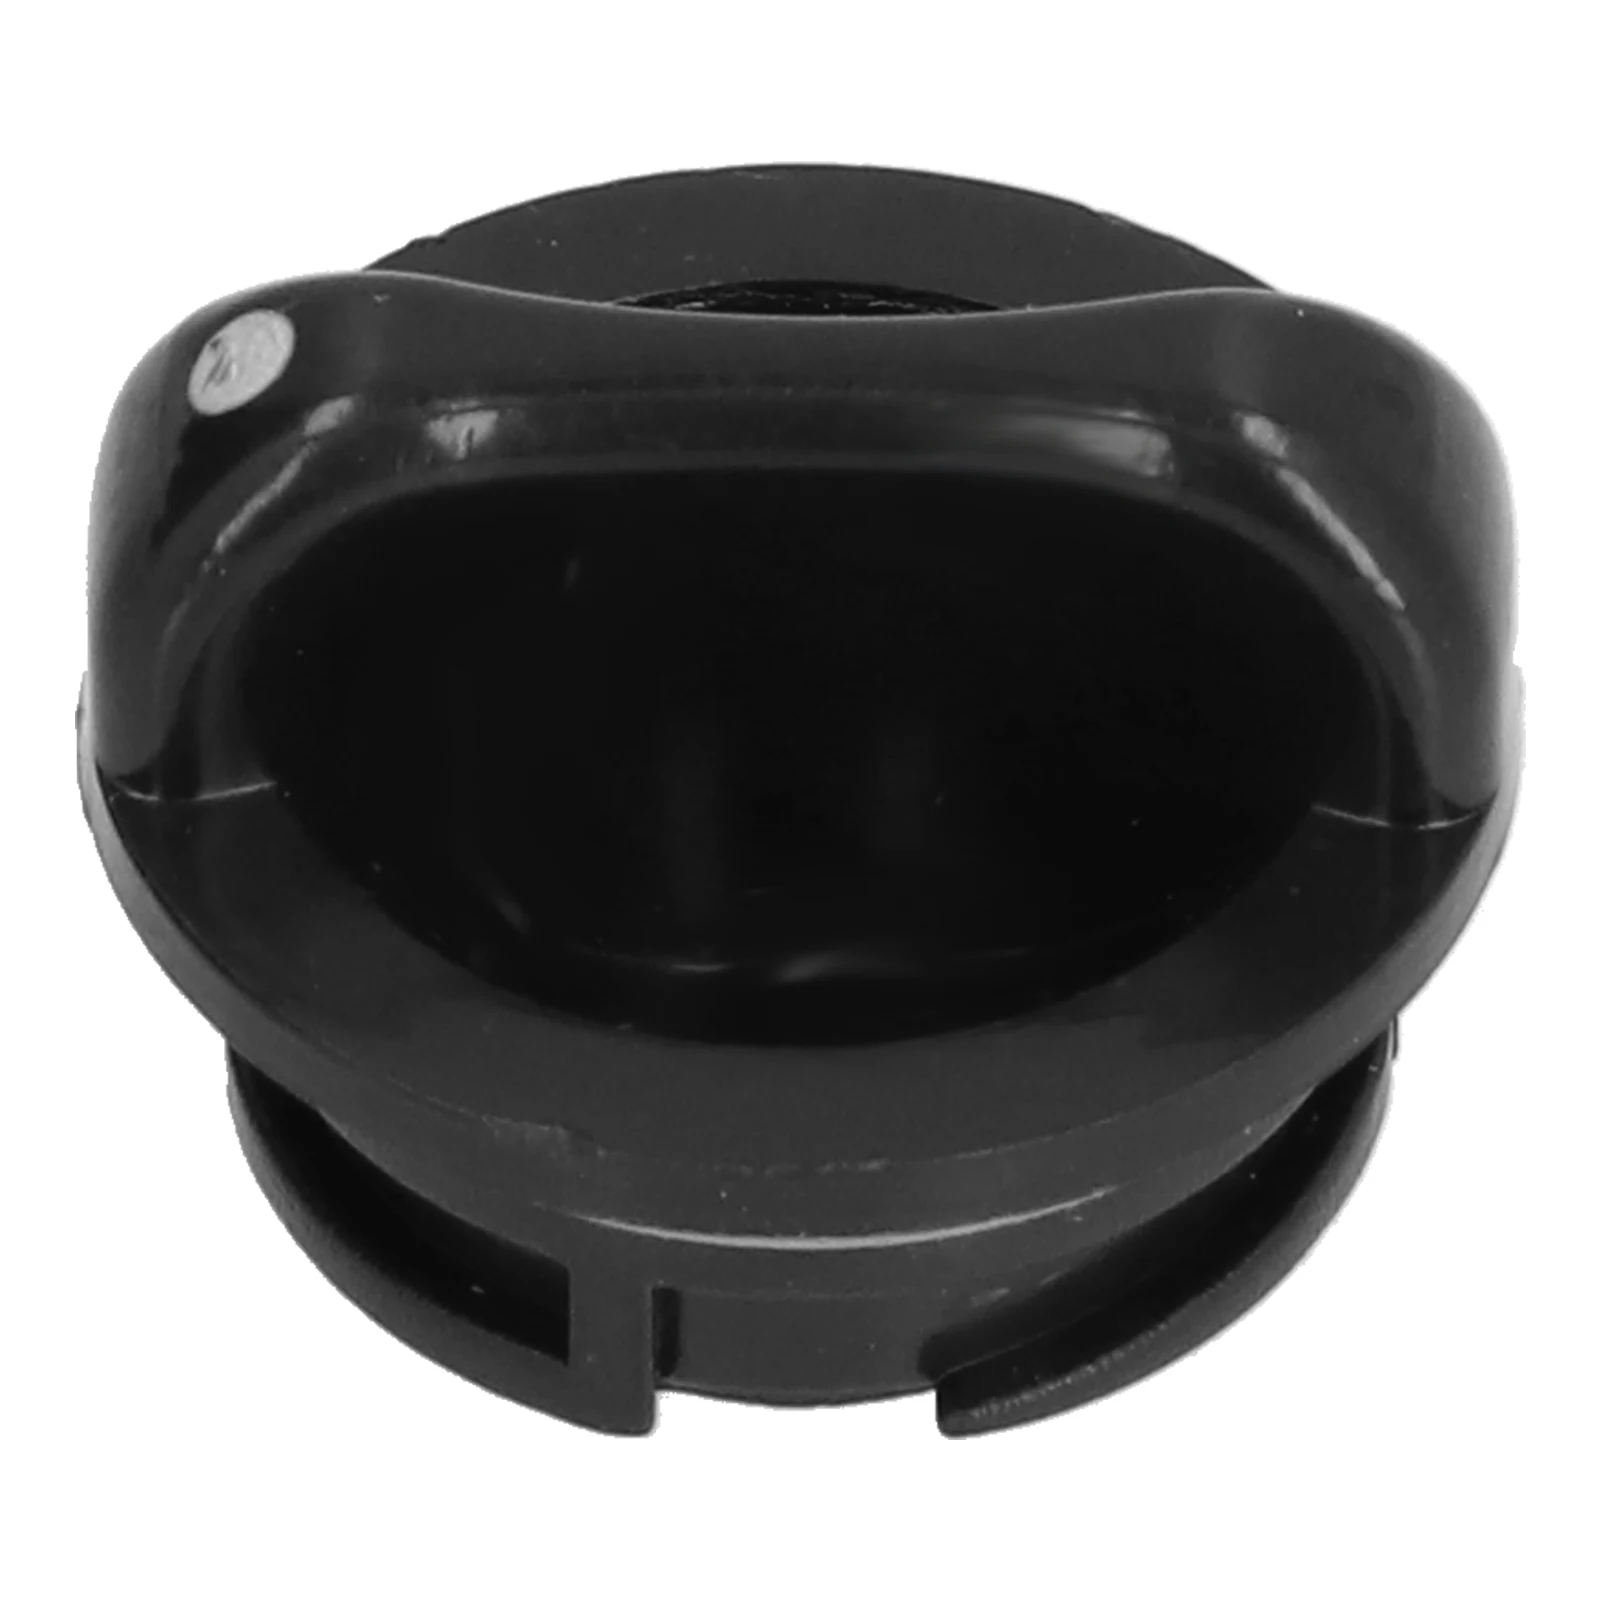 

Mop Fittings Water Tank Cap Cover ABS Replacement Part Steaming Mop Accessory for X5 Cleaner Mop Water Tank Cover